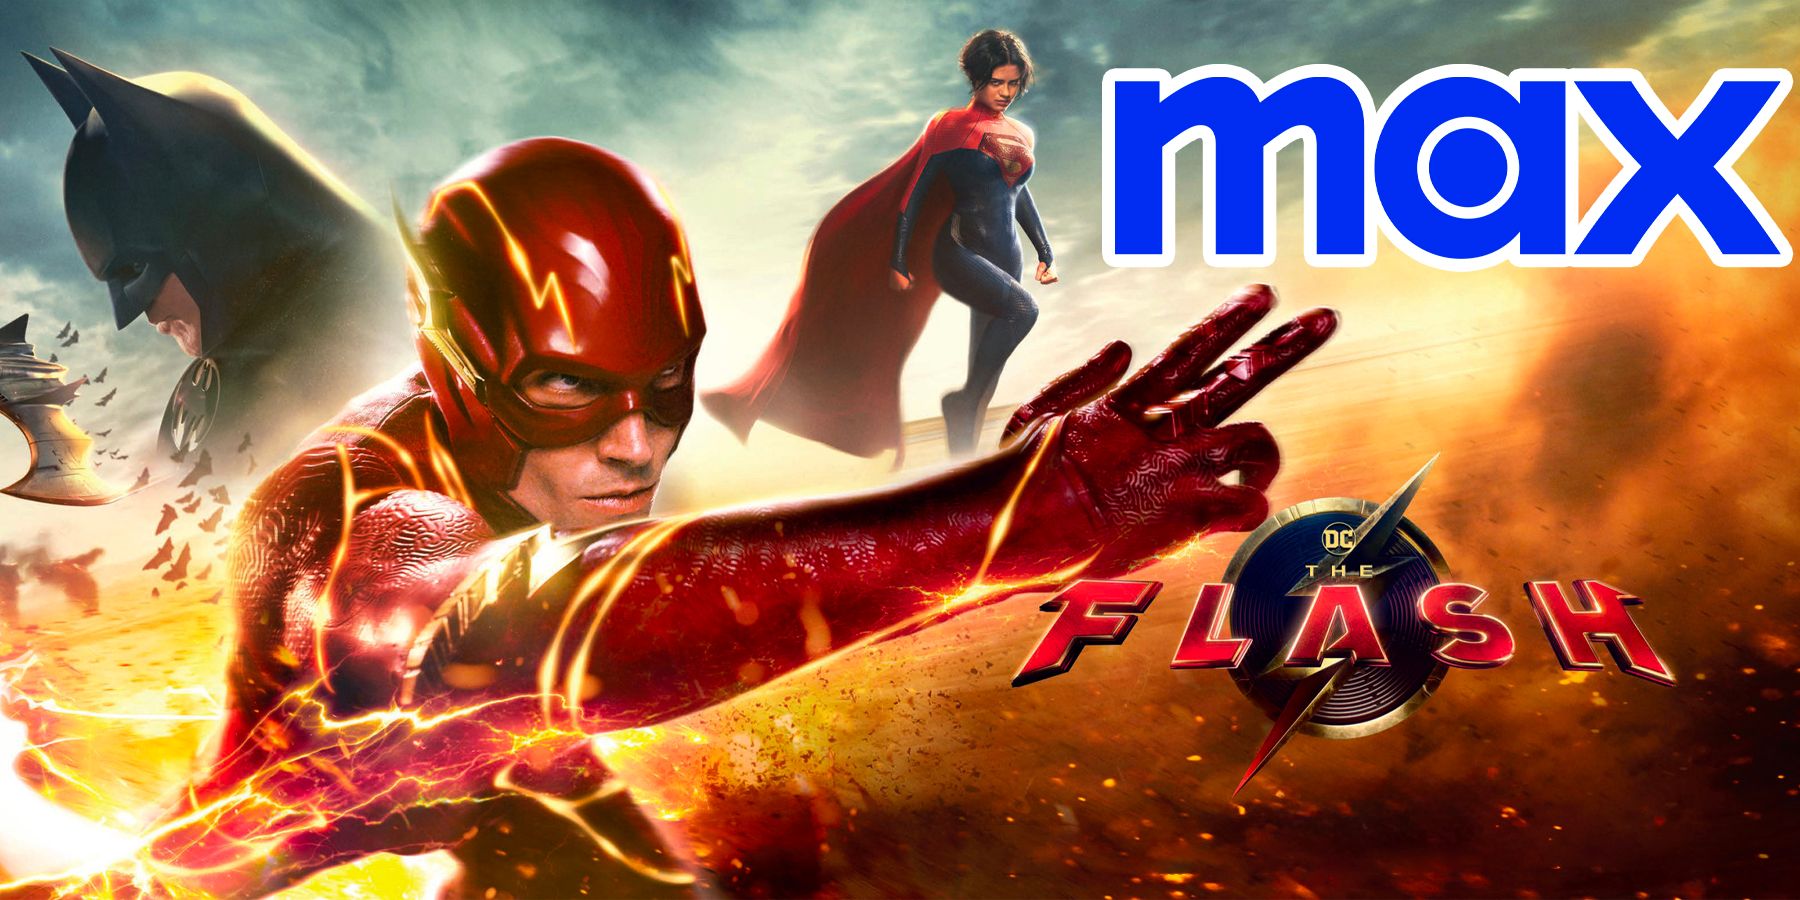 The Flash Max Streaming Release Date Officially Announced By WB